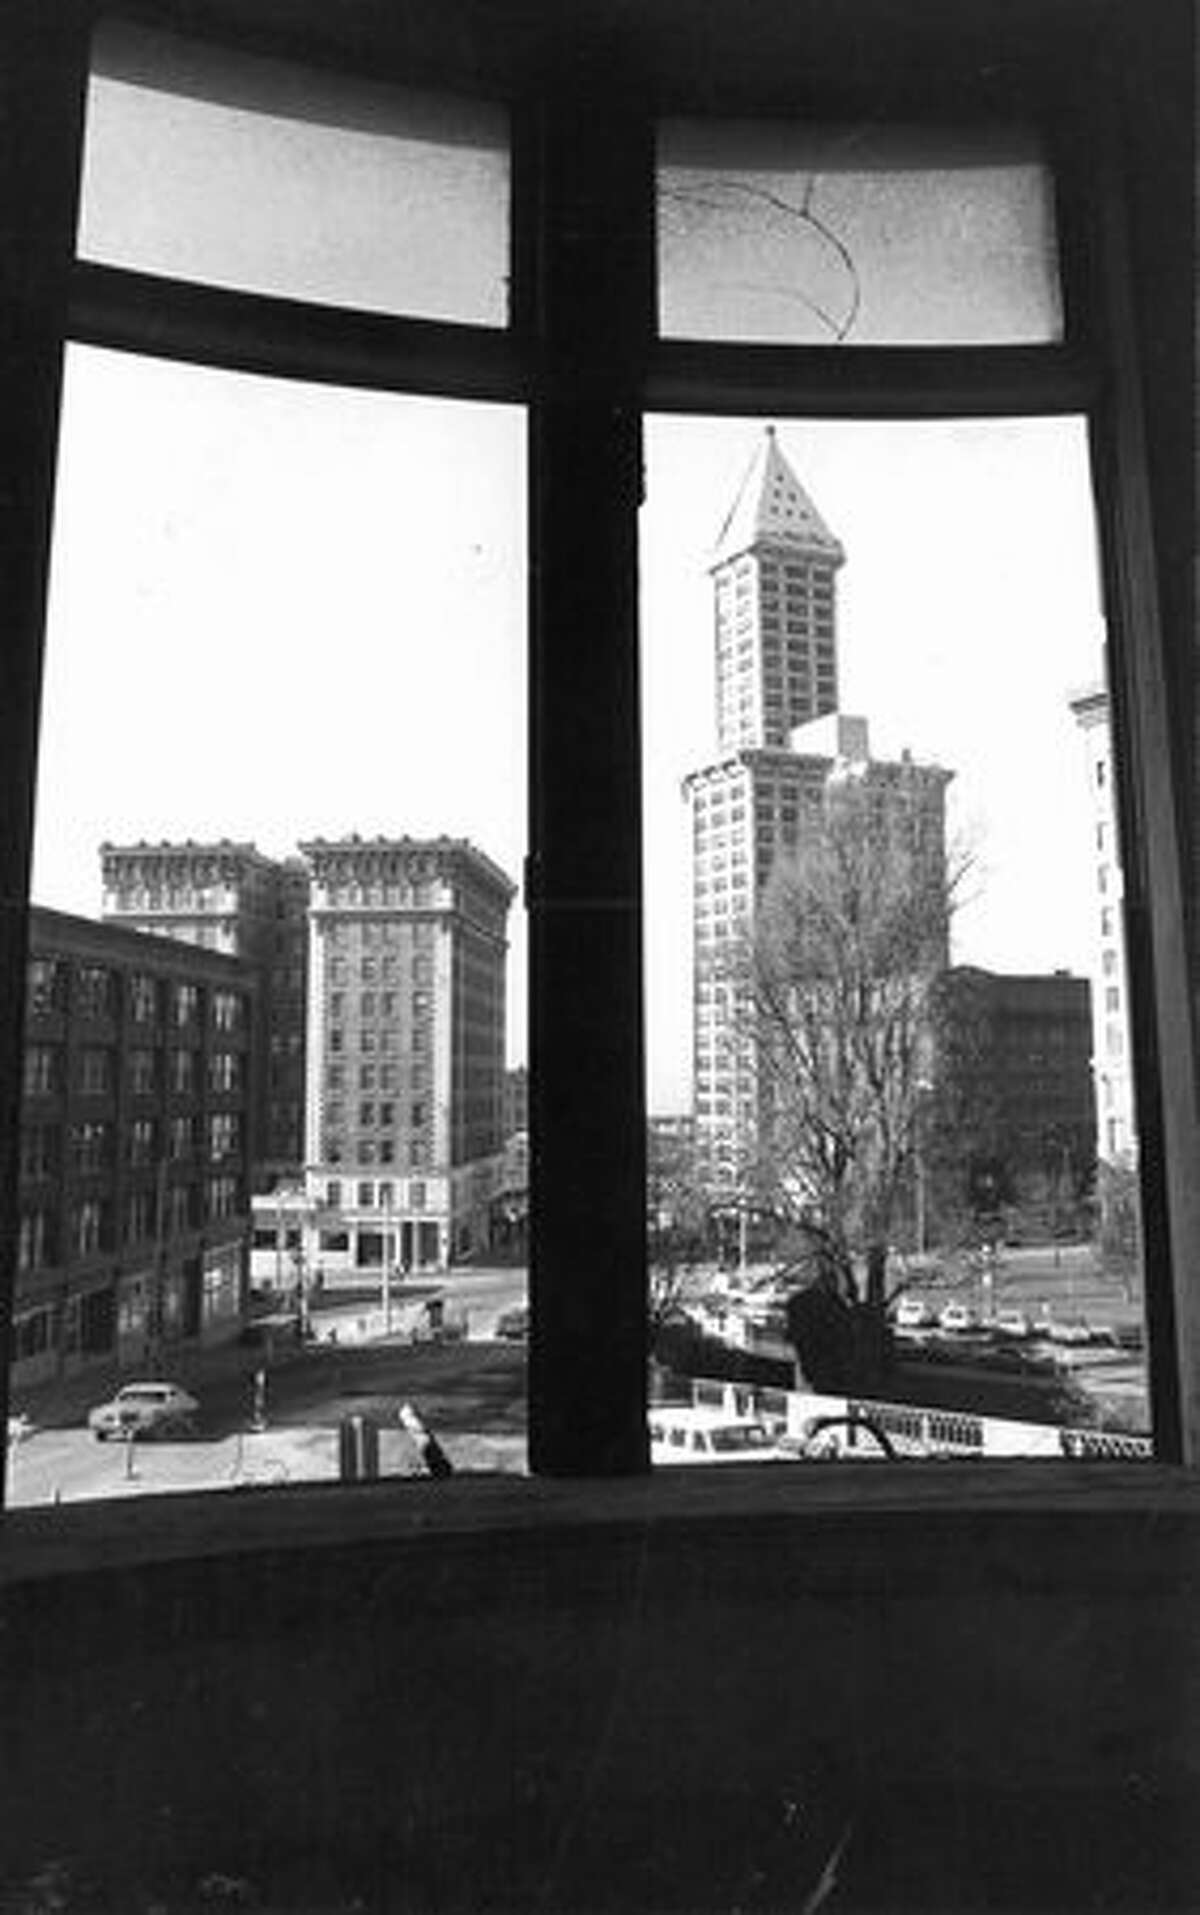 smith tower rental